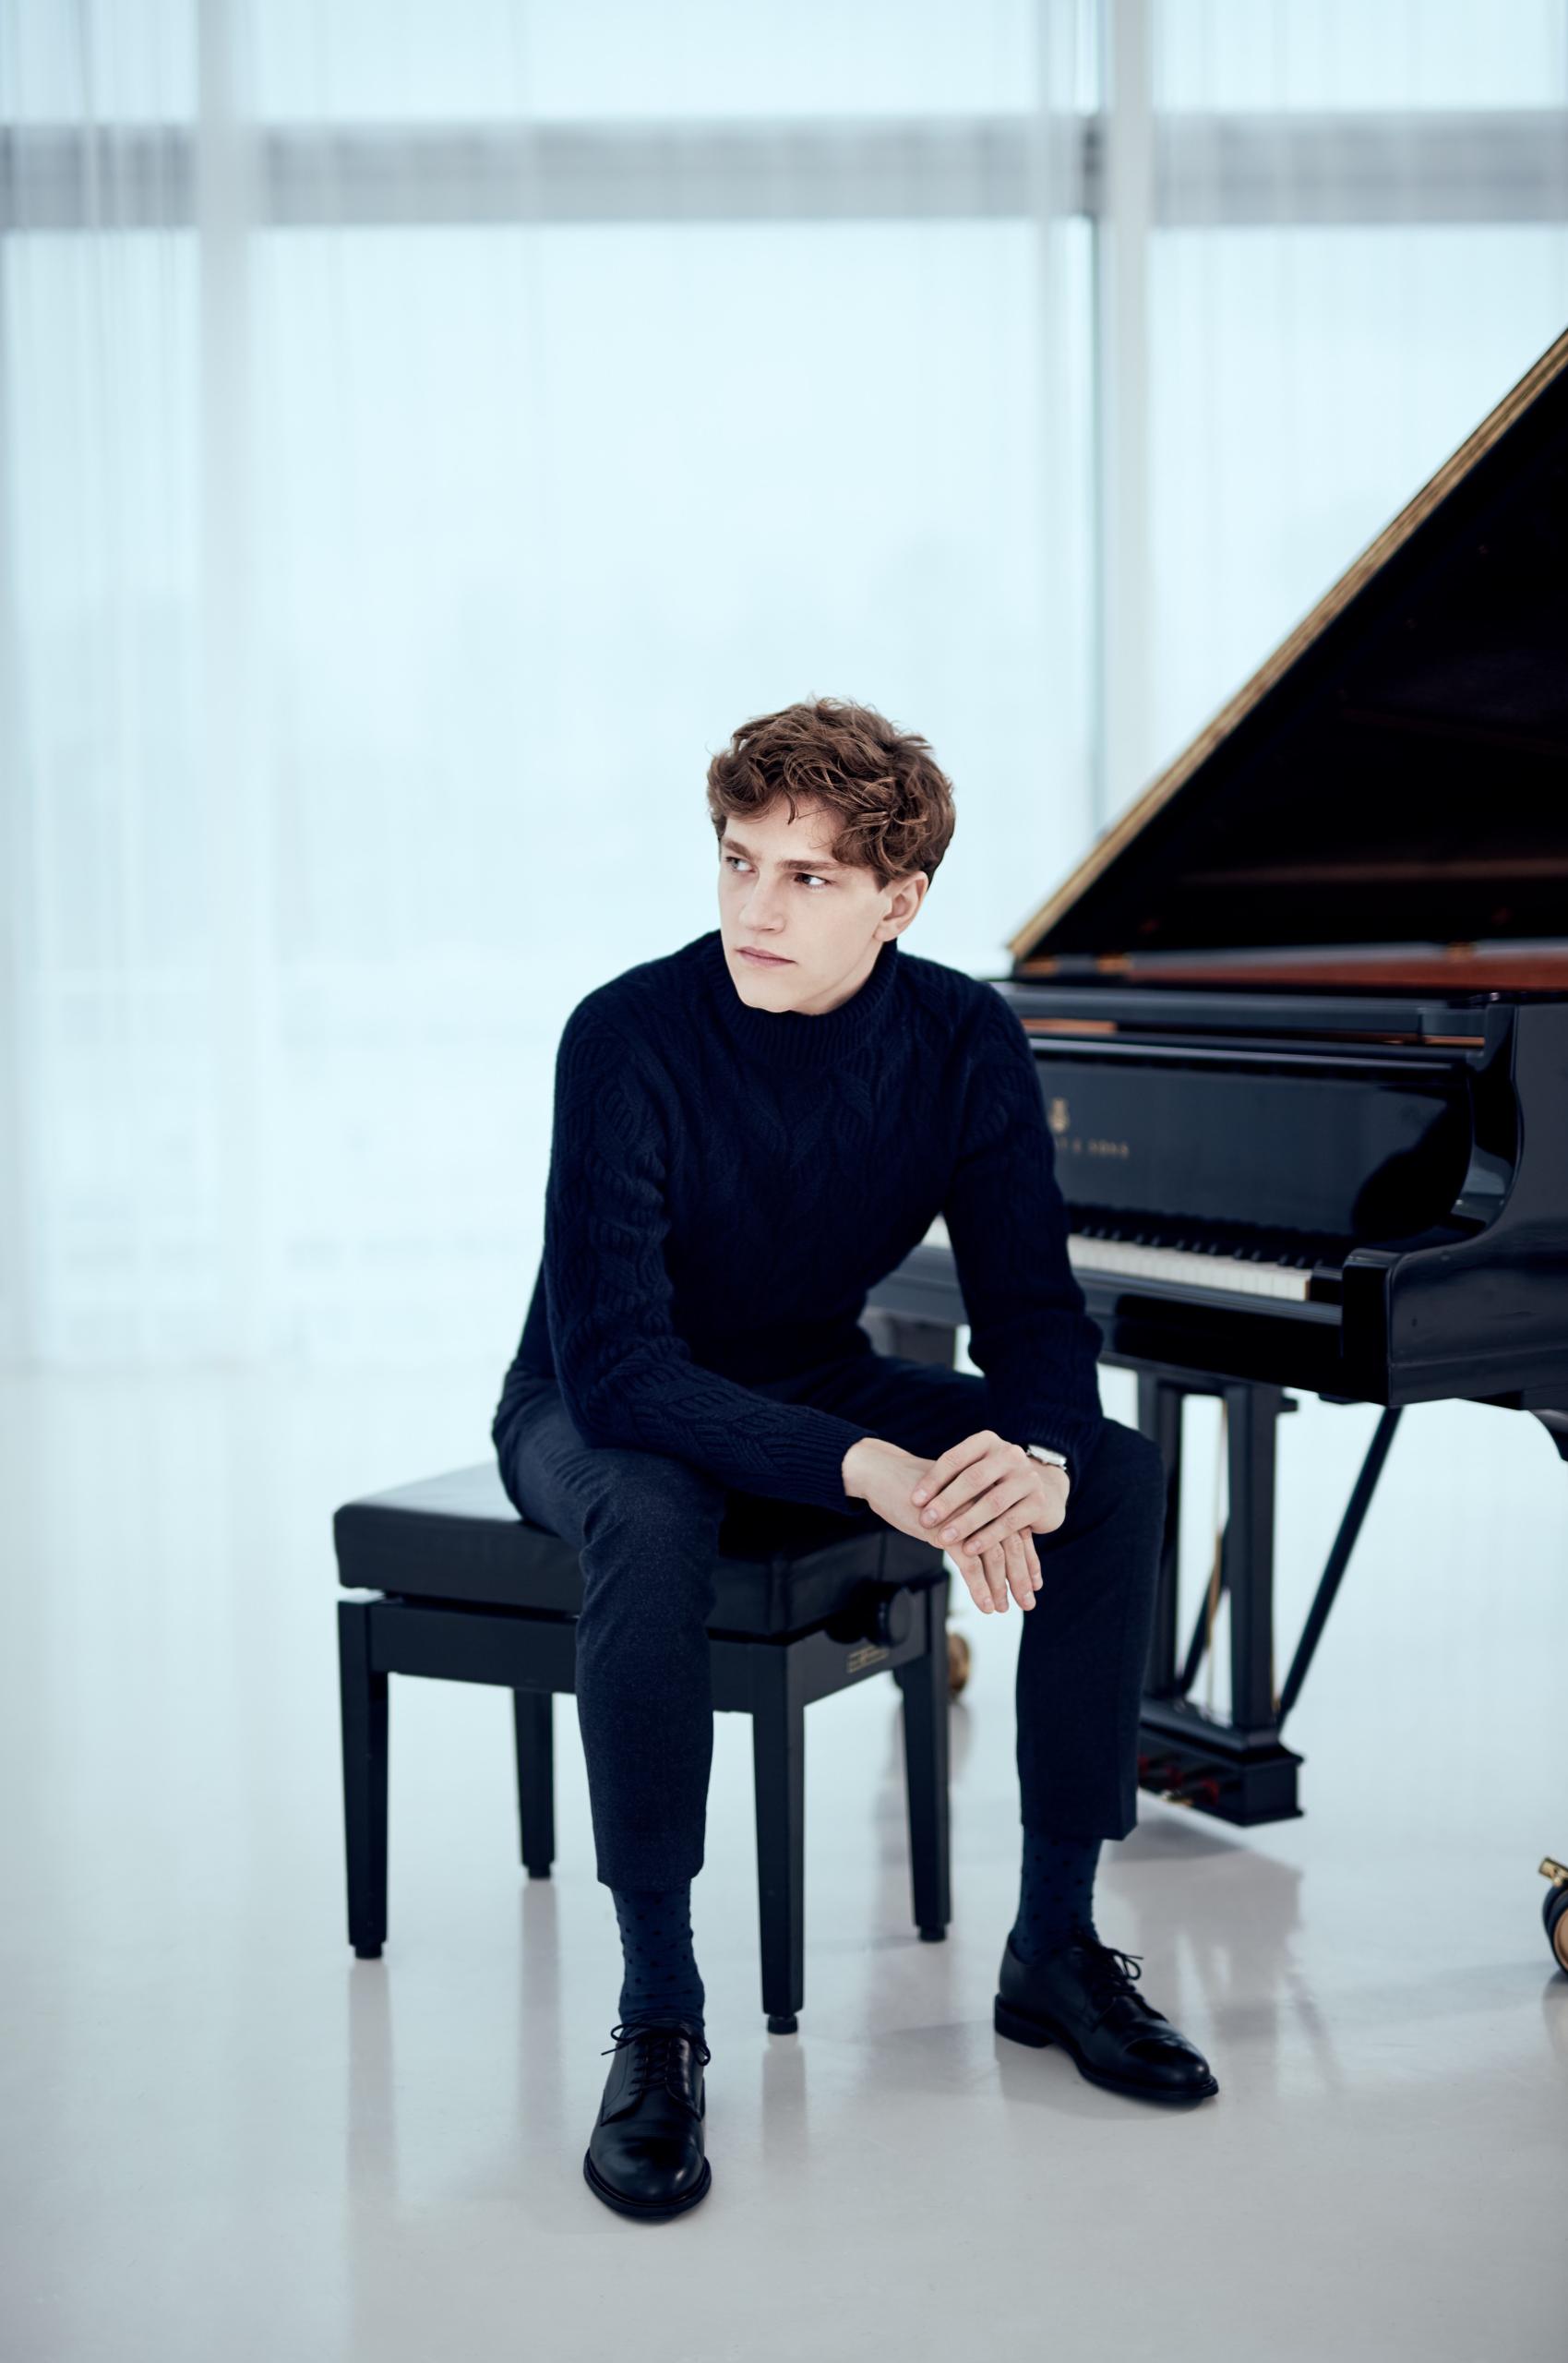 Young pianist Jan Lisiecki sits on the piano stool in front of a black grand piano